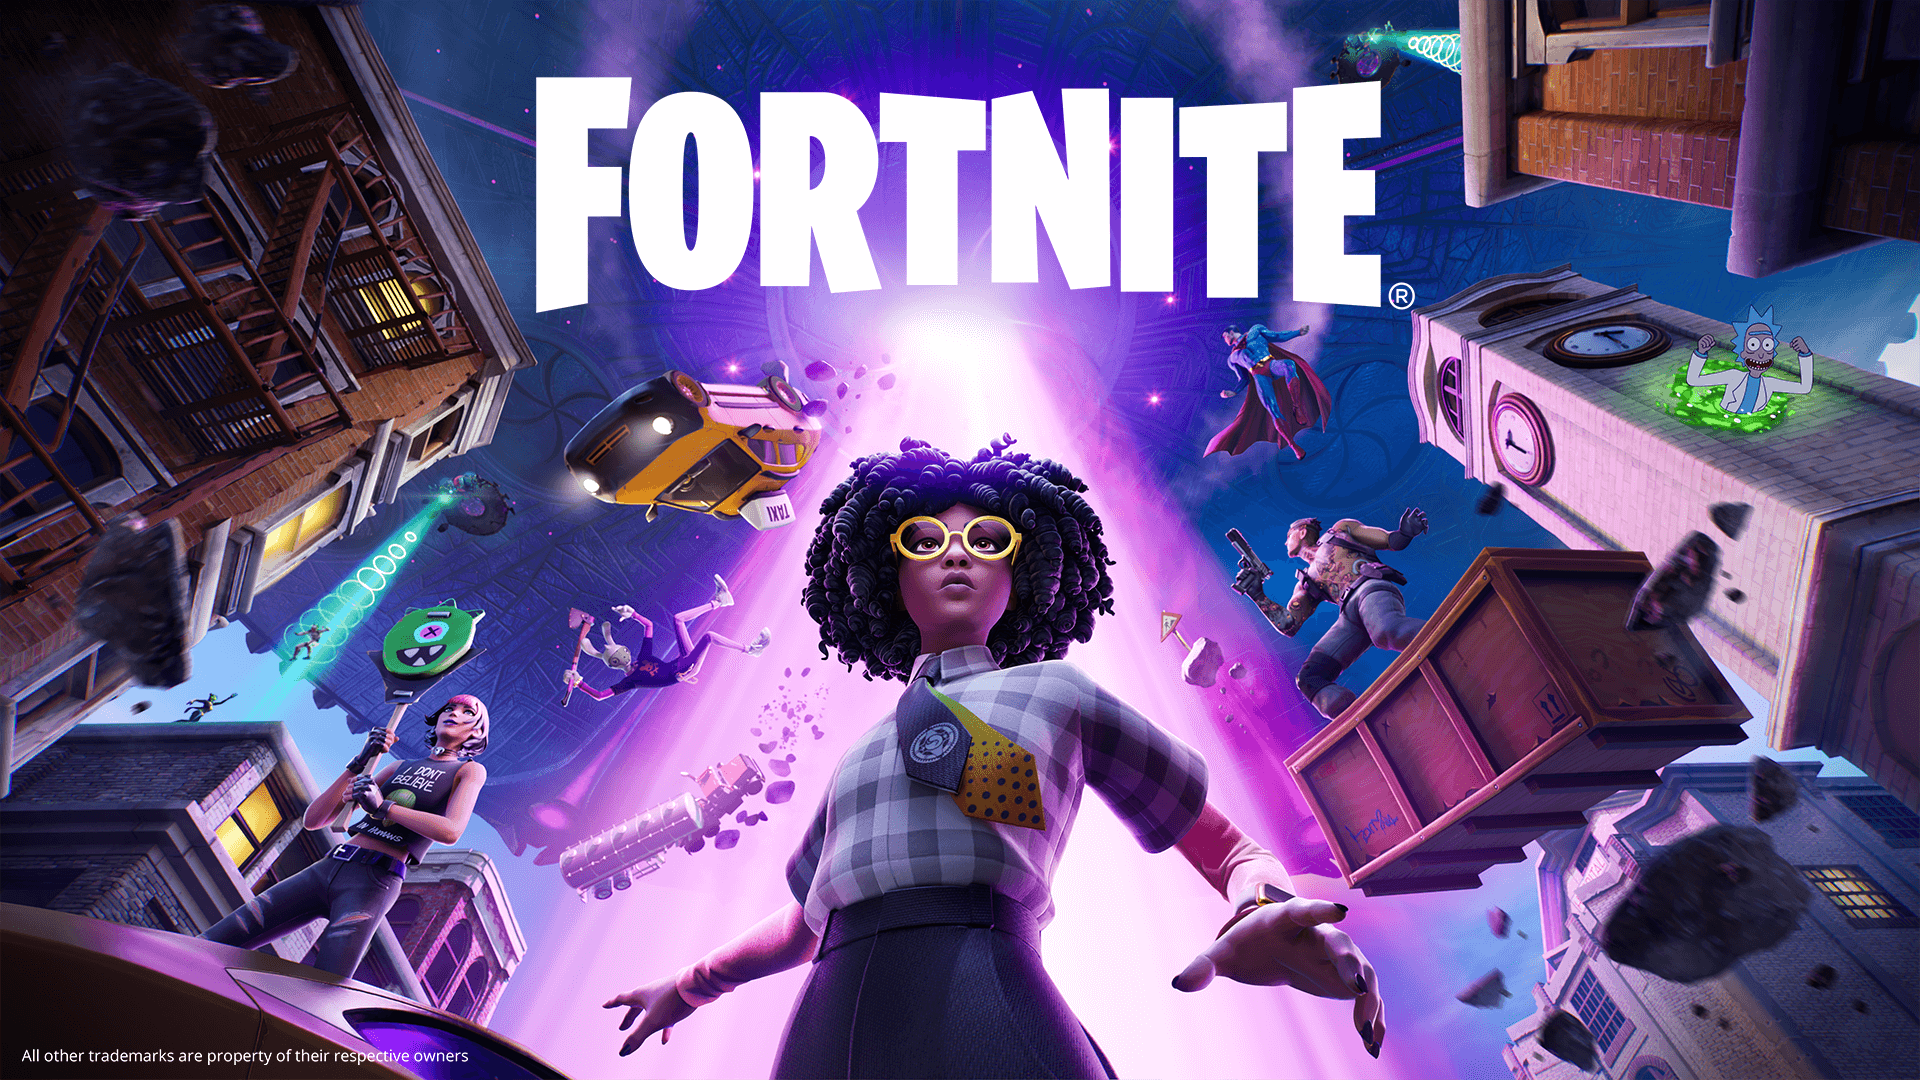 Fortnite is an online video game developed by Epic Games and released in 2017. It is available in three distinct game mode versions that otherwise sha...